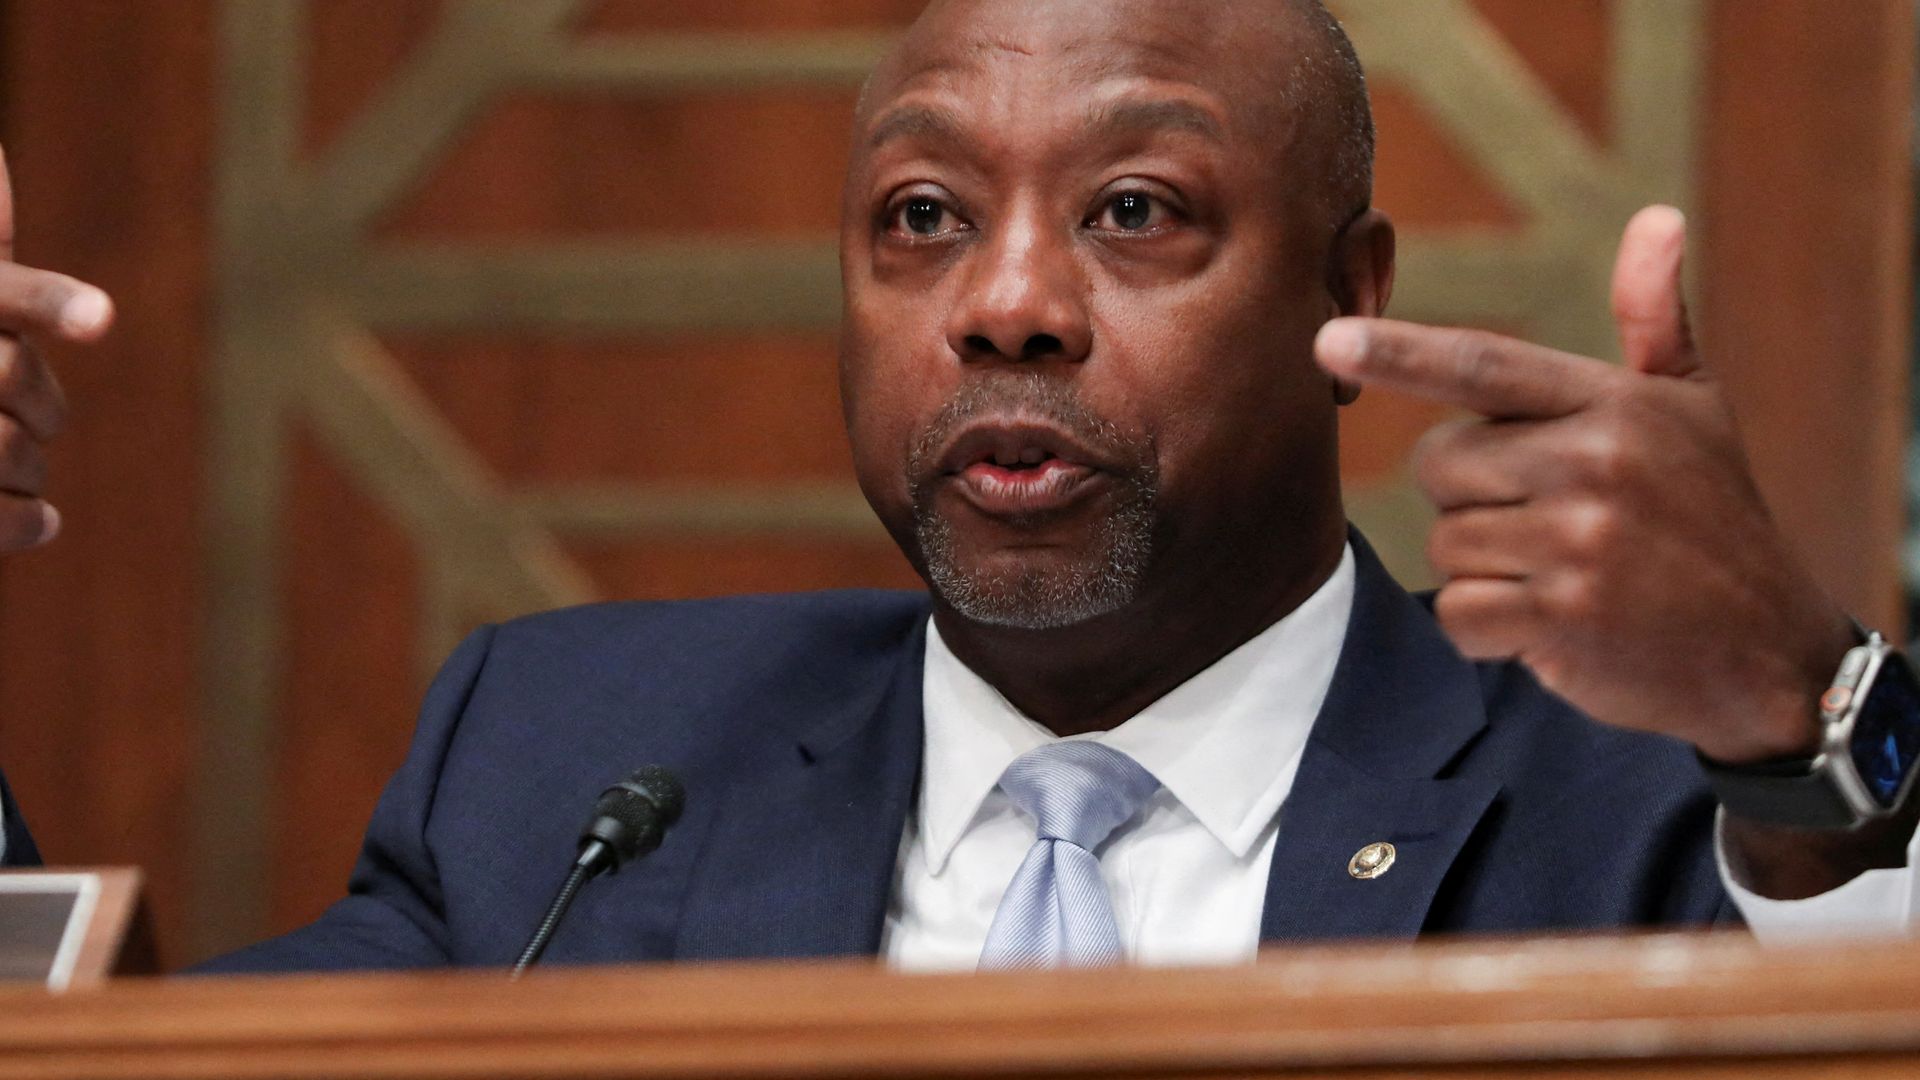 Senator Tim Scott, R-S.C., believes in American exceptionalism and offers an alternative to race-based identity politics.